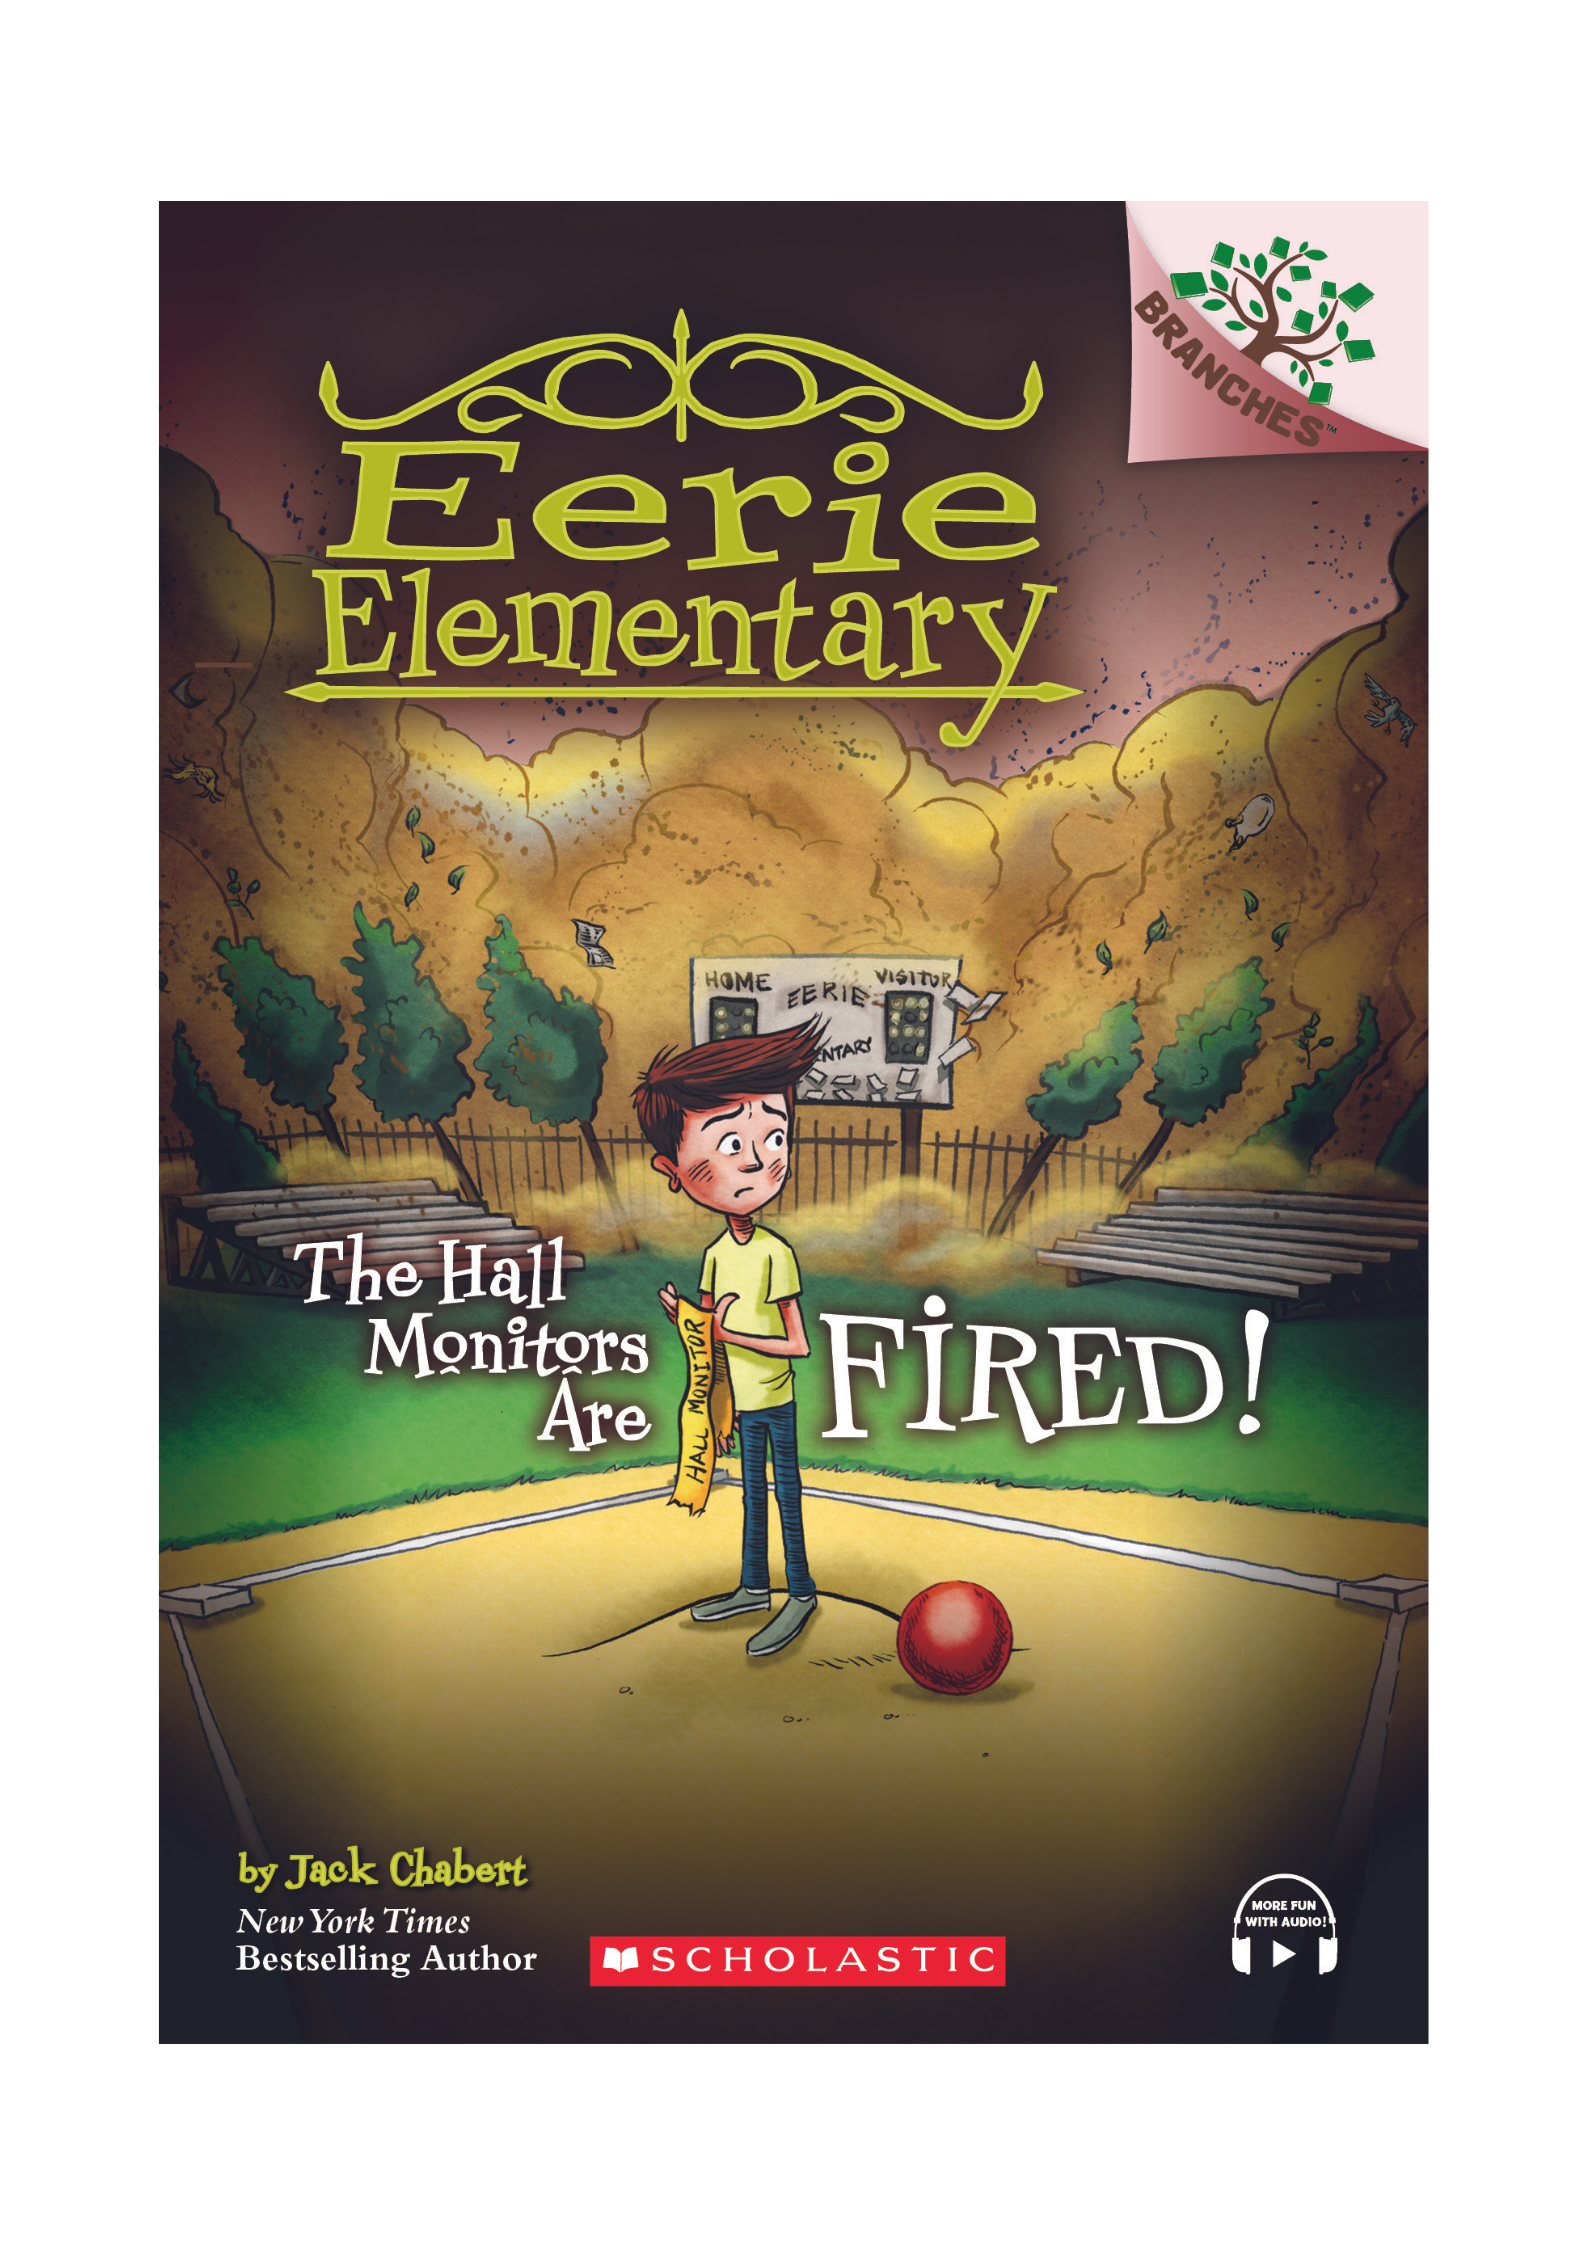 Branches – Eerie Elementary #8: The Hall Monitors Are Fired!